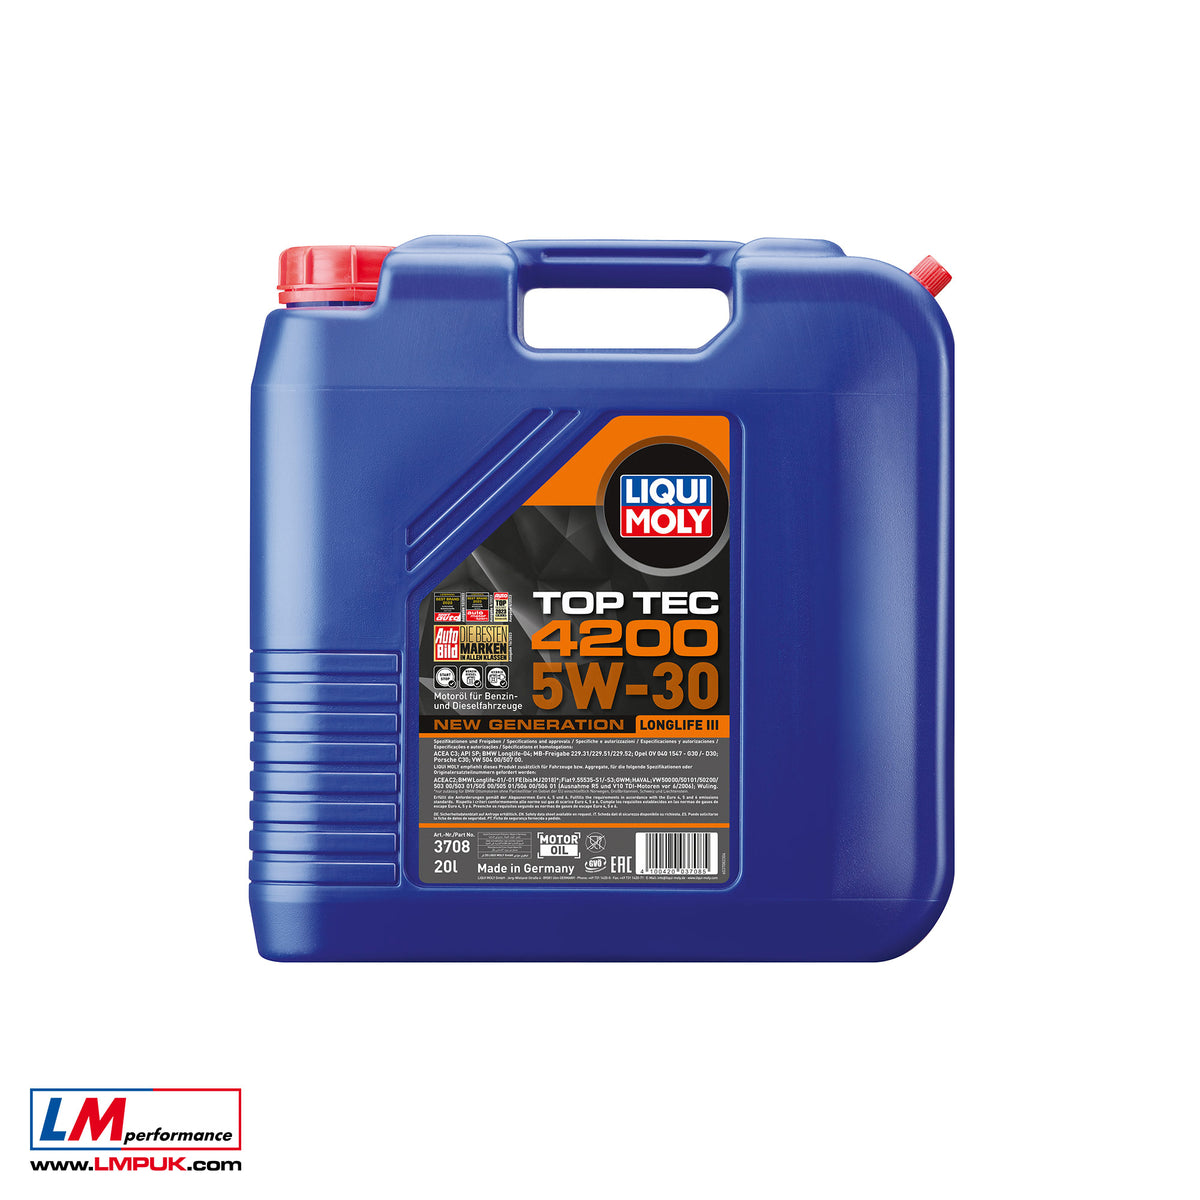  LIQUI MOLY Top Tec 4200 SAE 5W-30 New Generation, 5 L, Synthesis technology motor oil